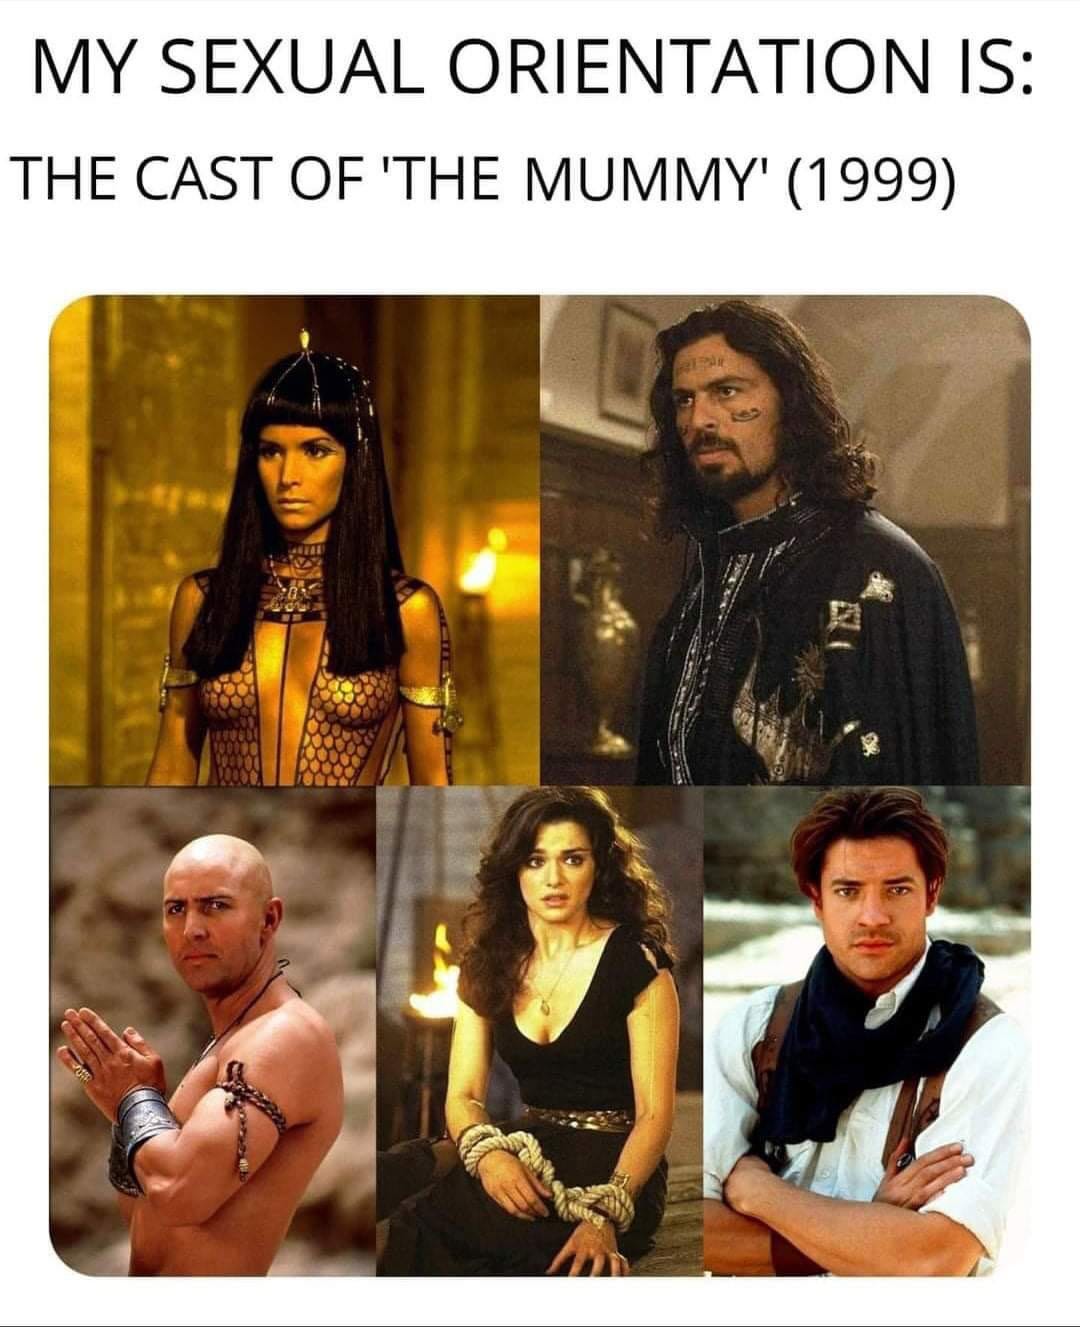 Meme: My sexual orientation is the cast of The Mummy (under text are photos of all five main characters)